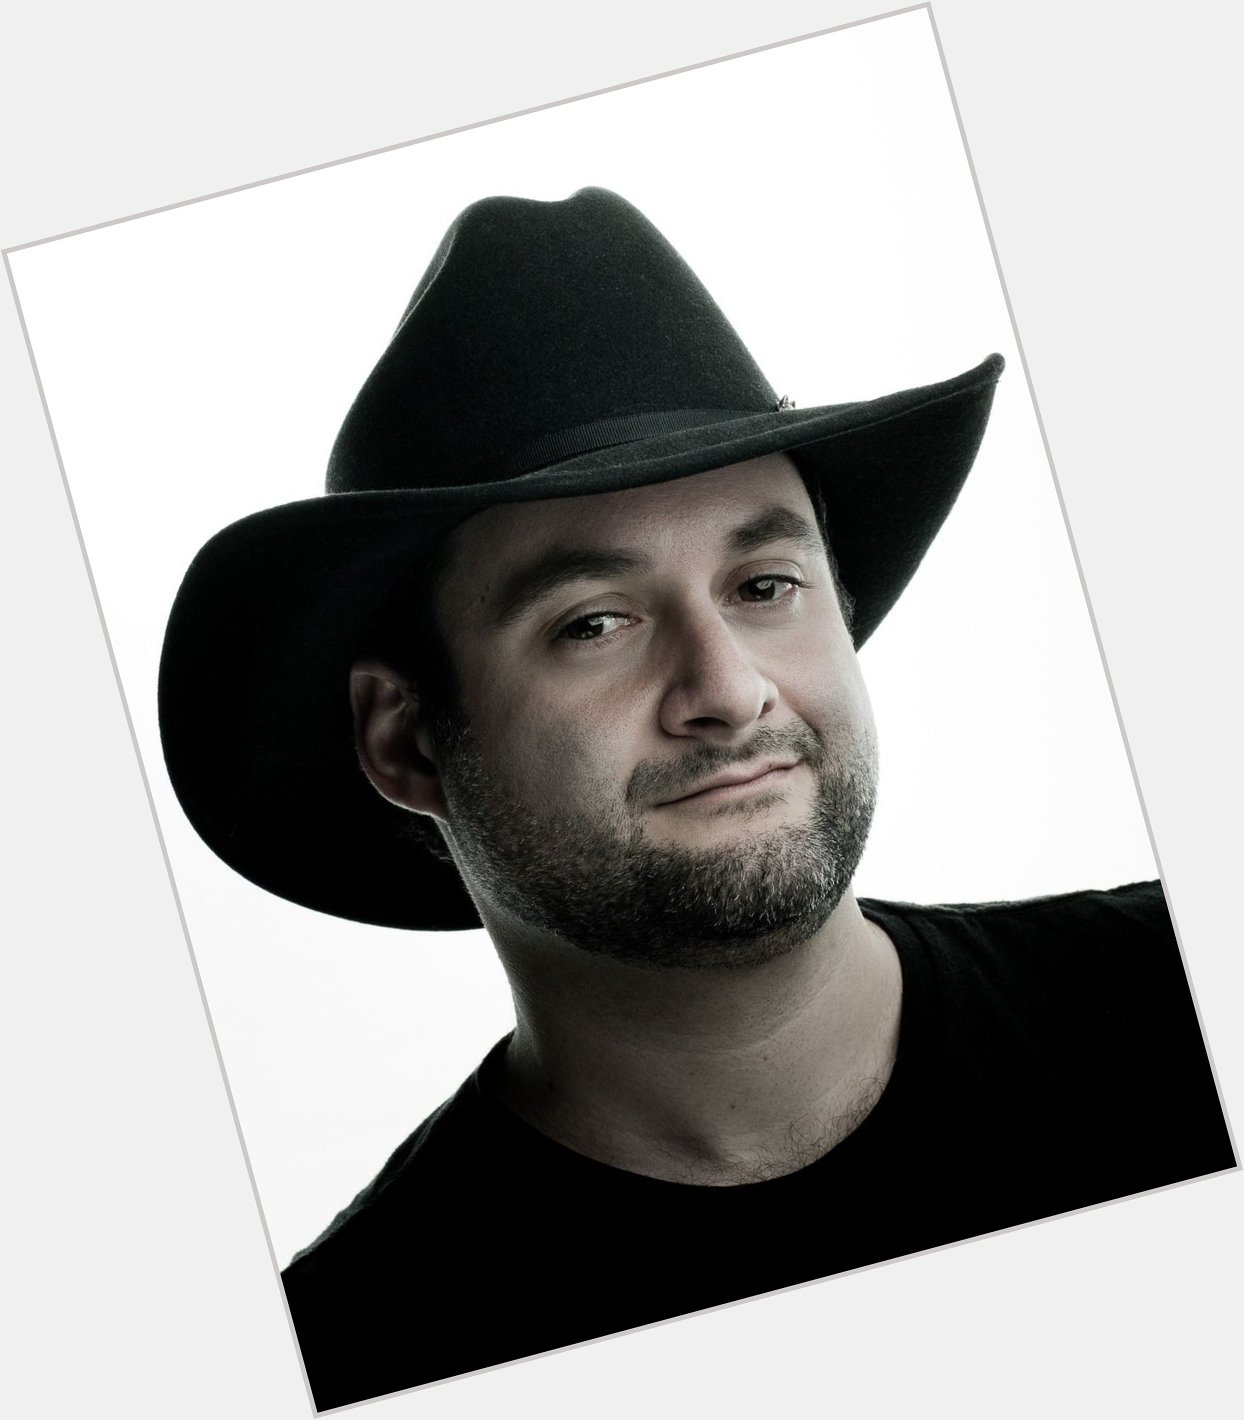 Let\s all wish DAVE FILONI A happy birthday 